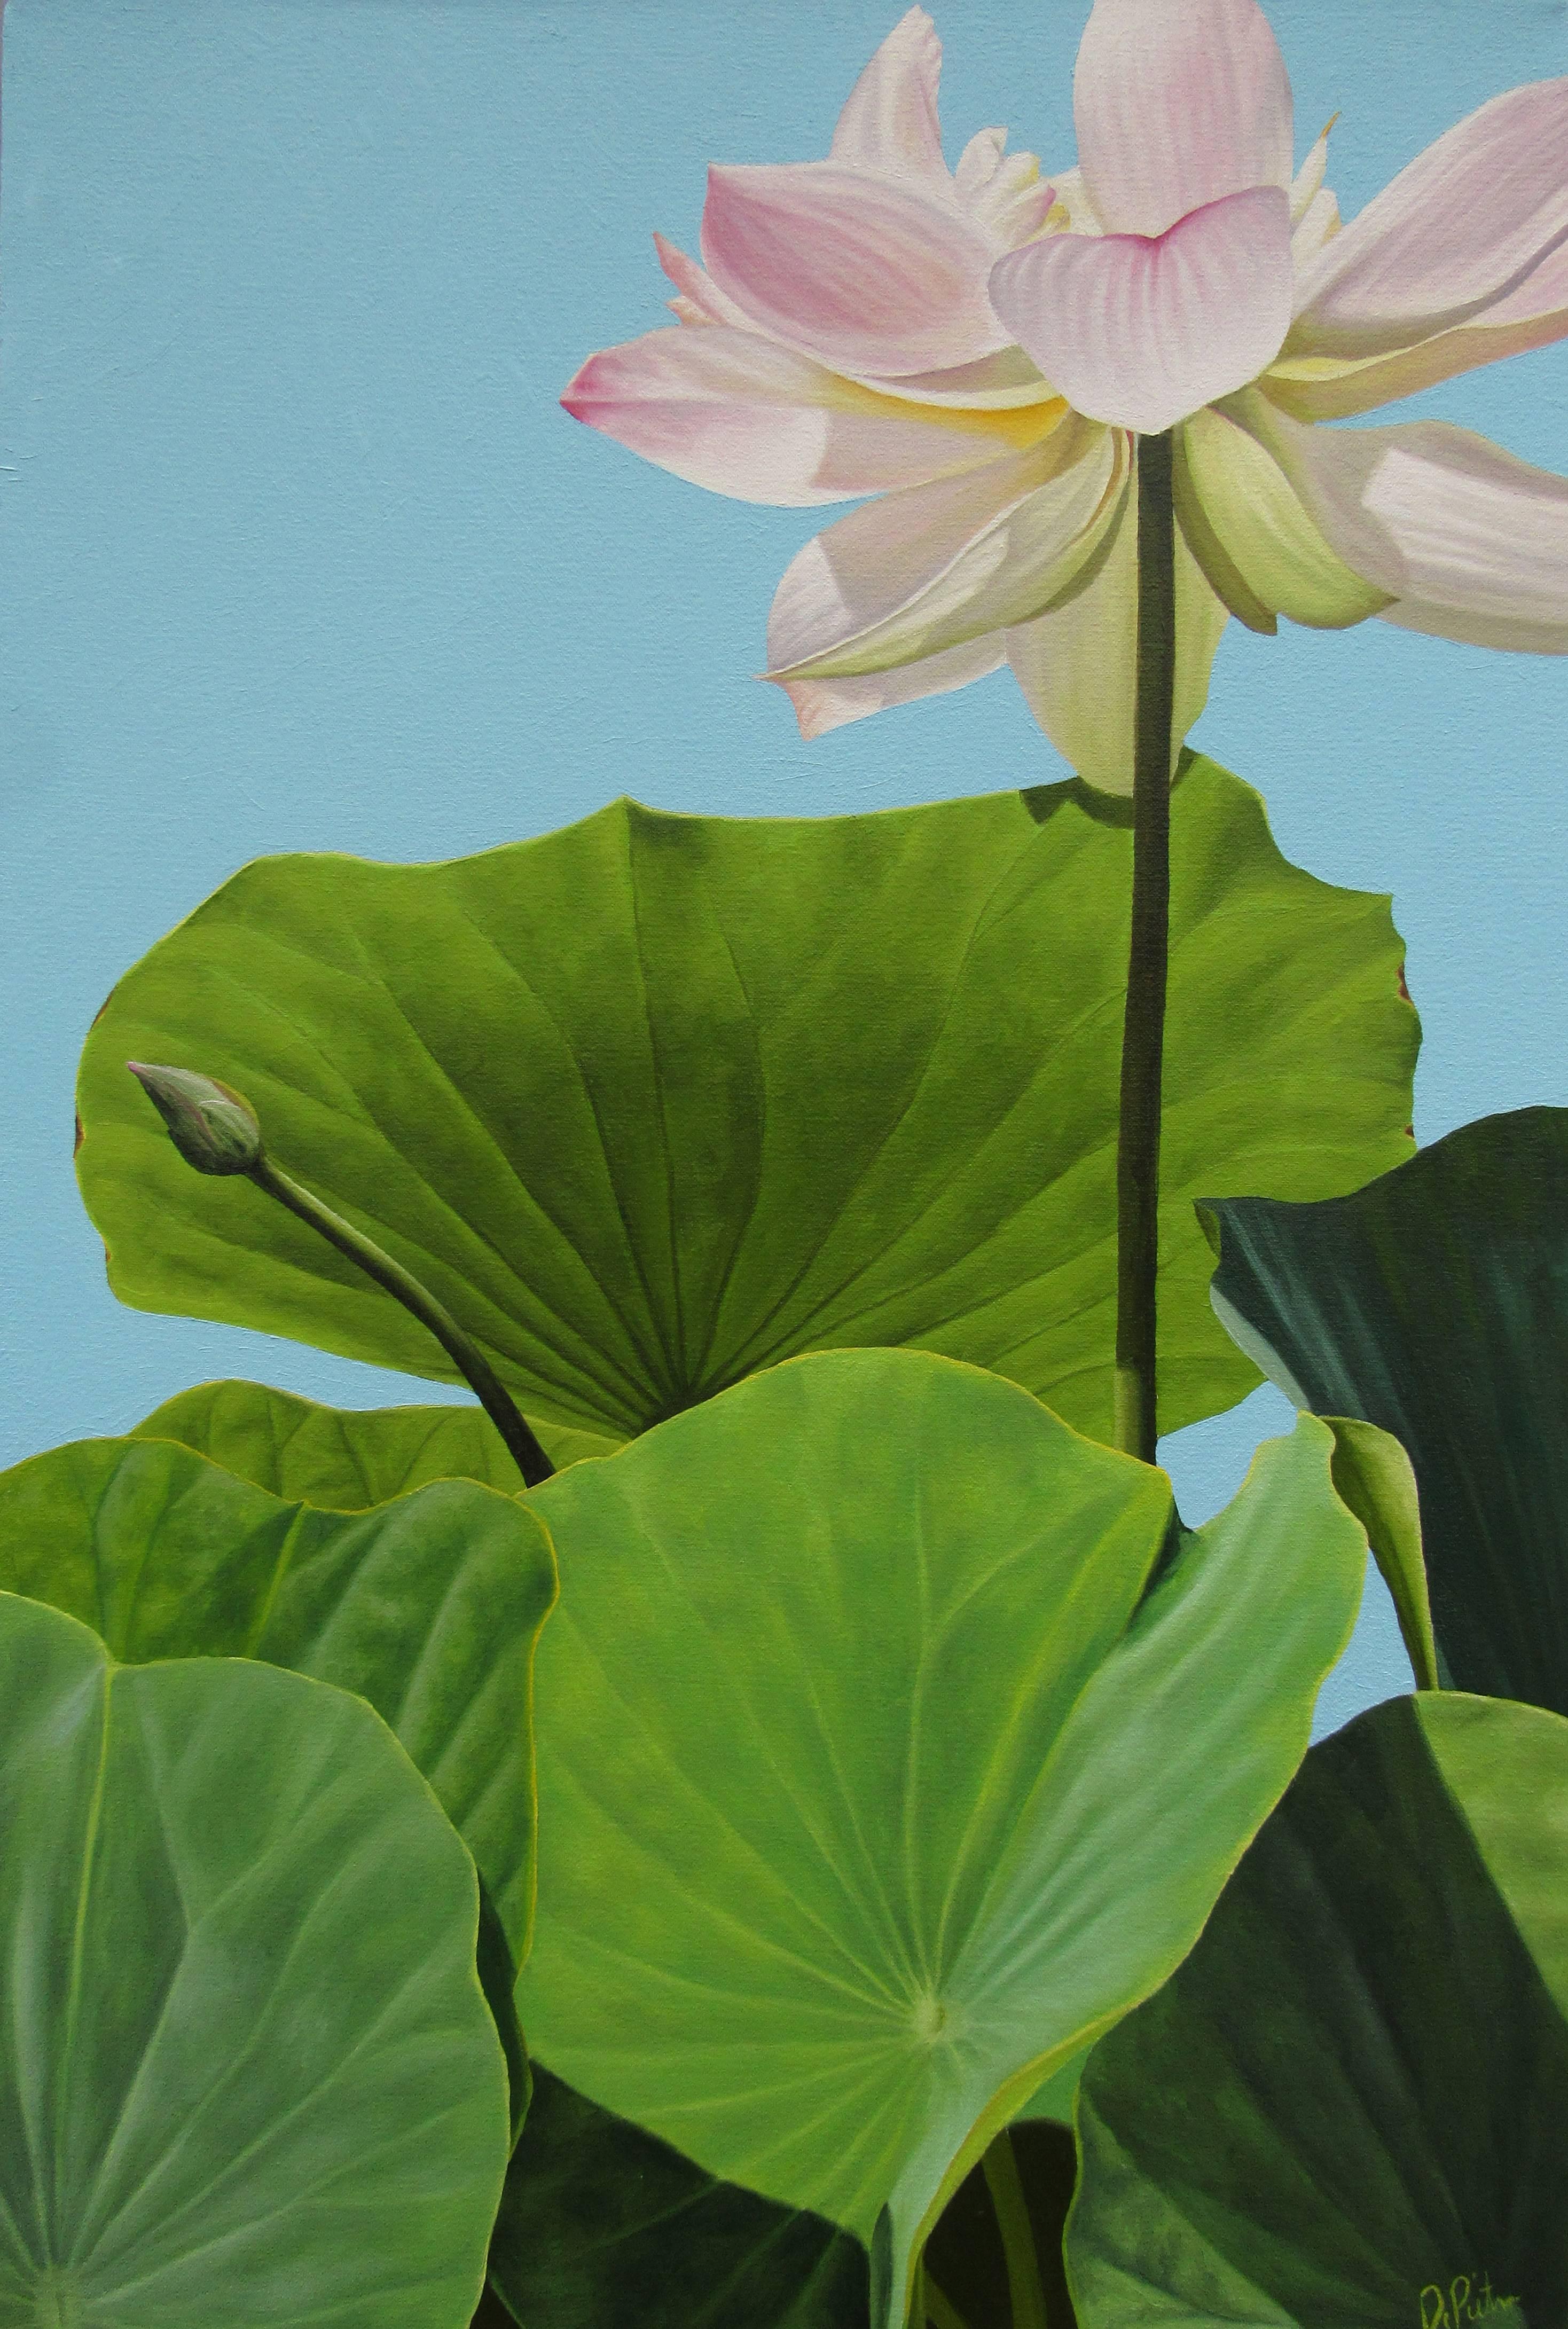 Frank DePietro Figurative Painting - Lotus No 10. (Hard Edge Realist painting of White Lotus Flower and Leaves)